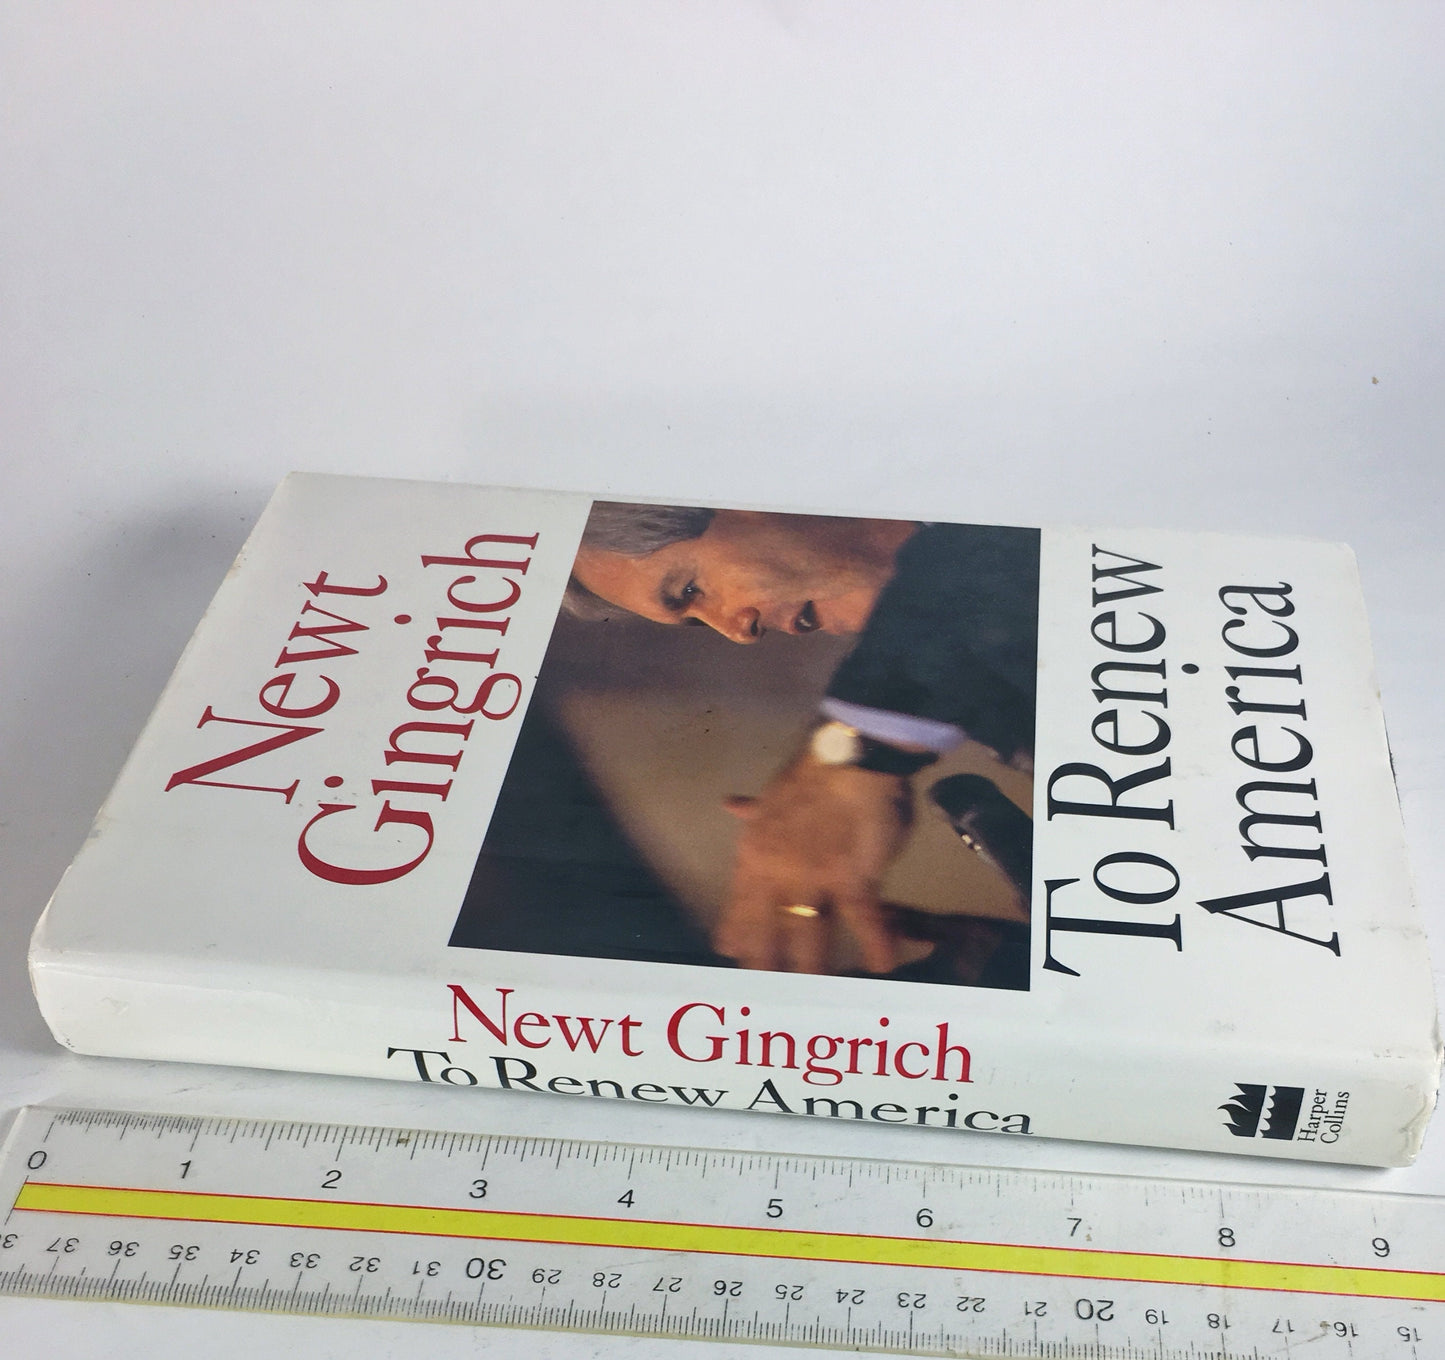 Newt Gingrich Biography. First Edition vintage book circa 1995. To Renew America. Book lover gift. White book decor. Republican